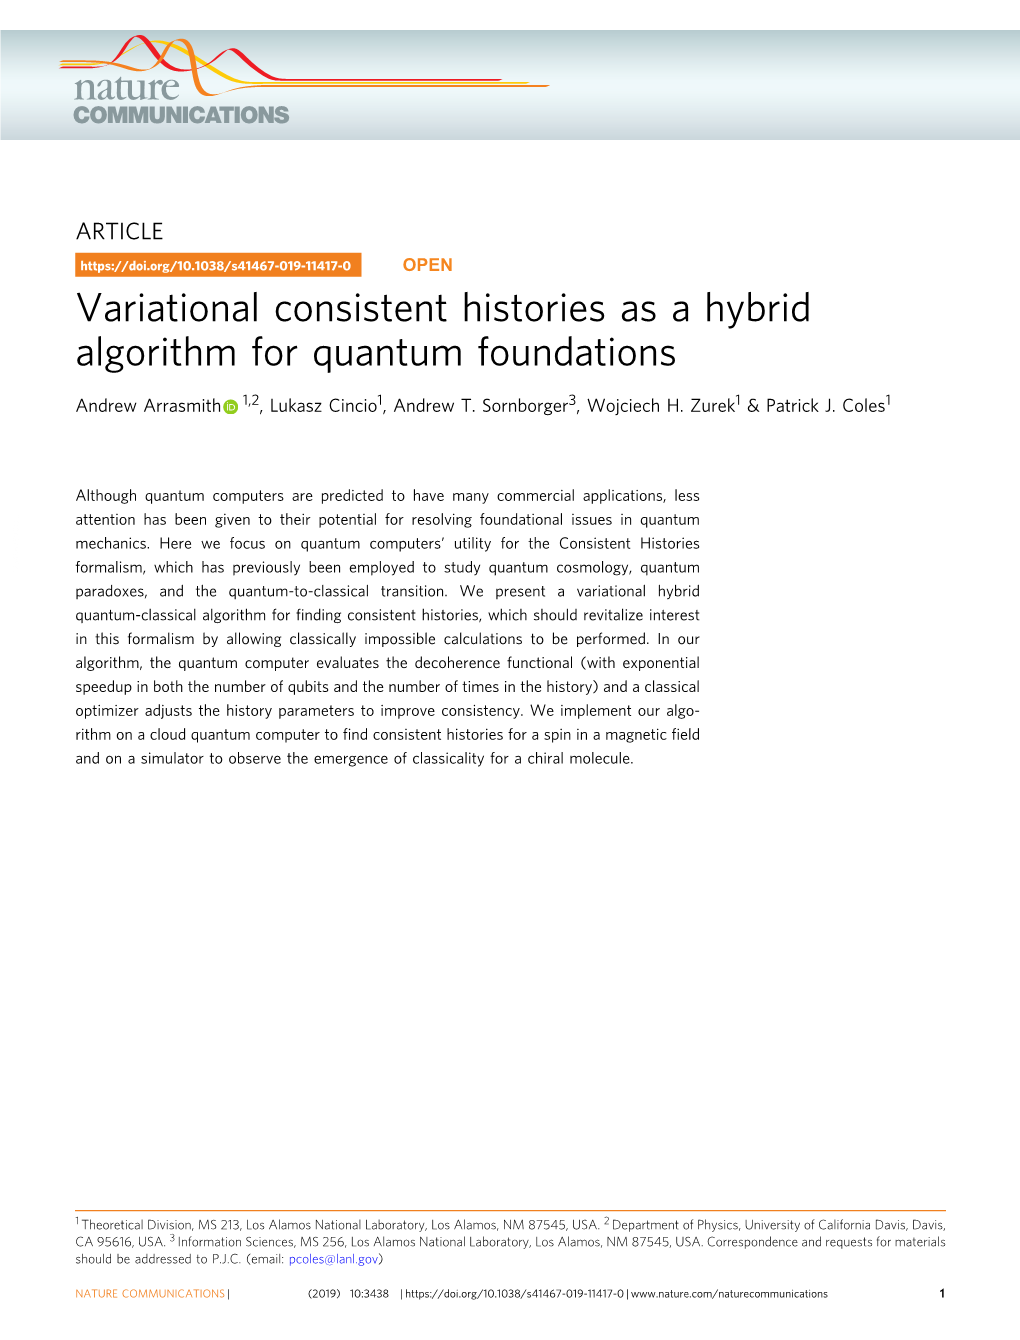 Variational Consistent Histories As a Hybrid Algorithm for Quantum Foundations